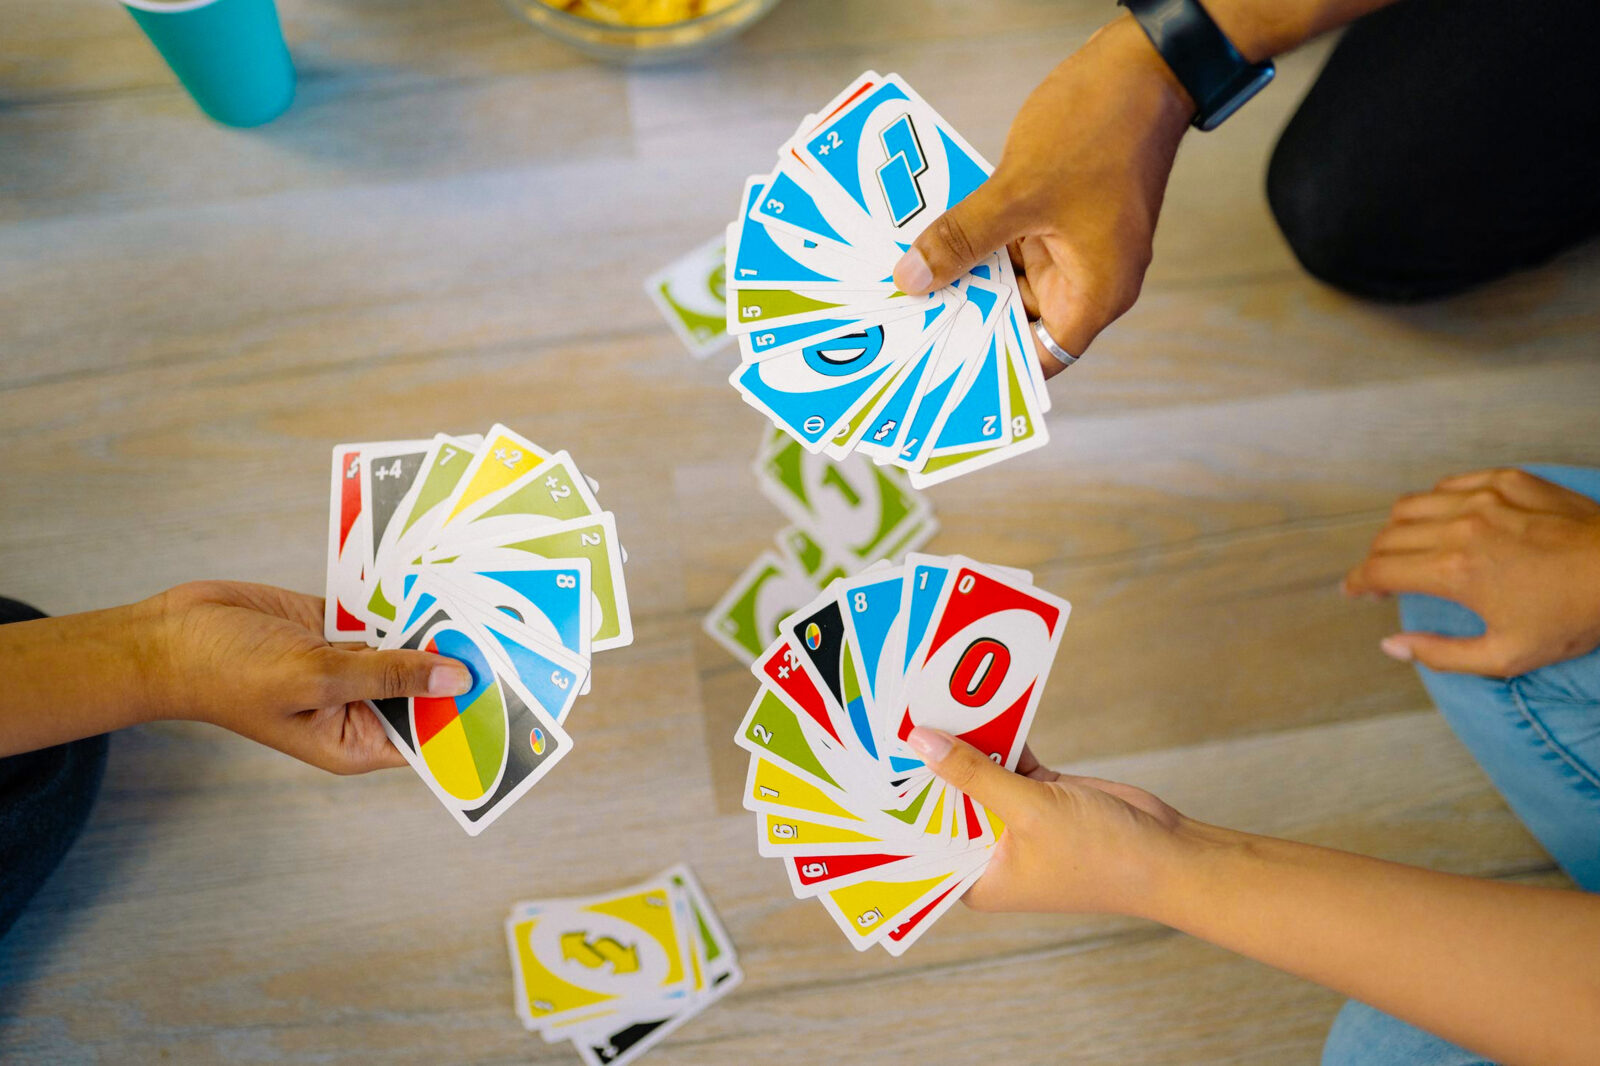 How To Play Uno 